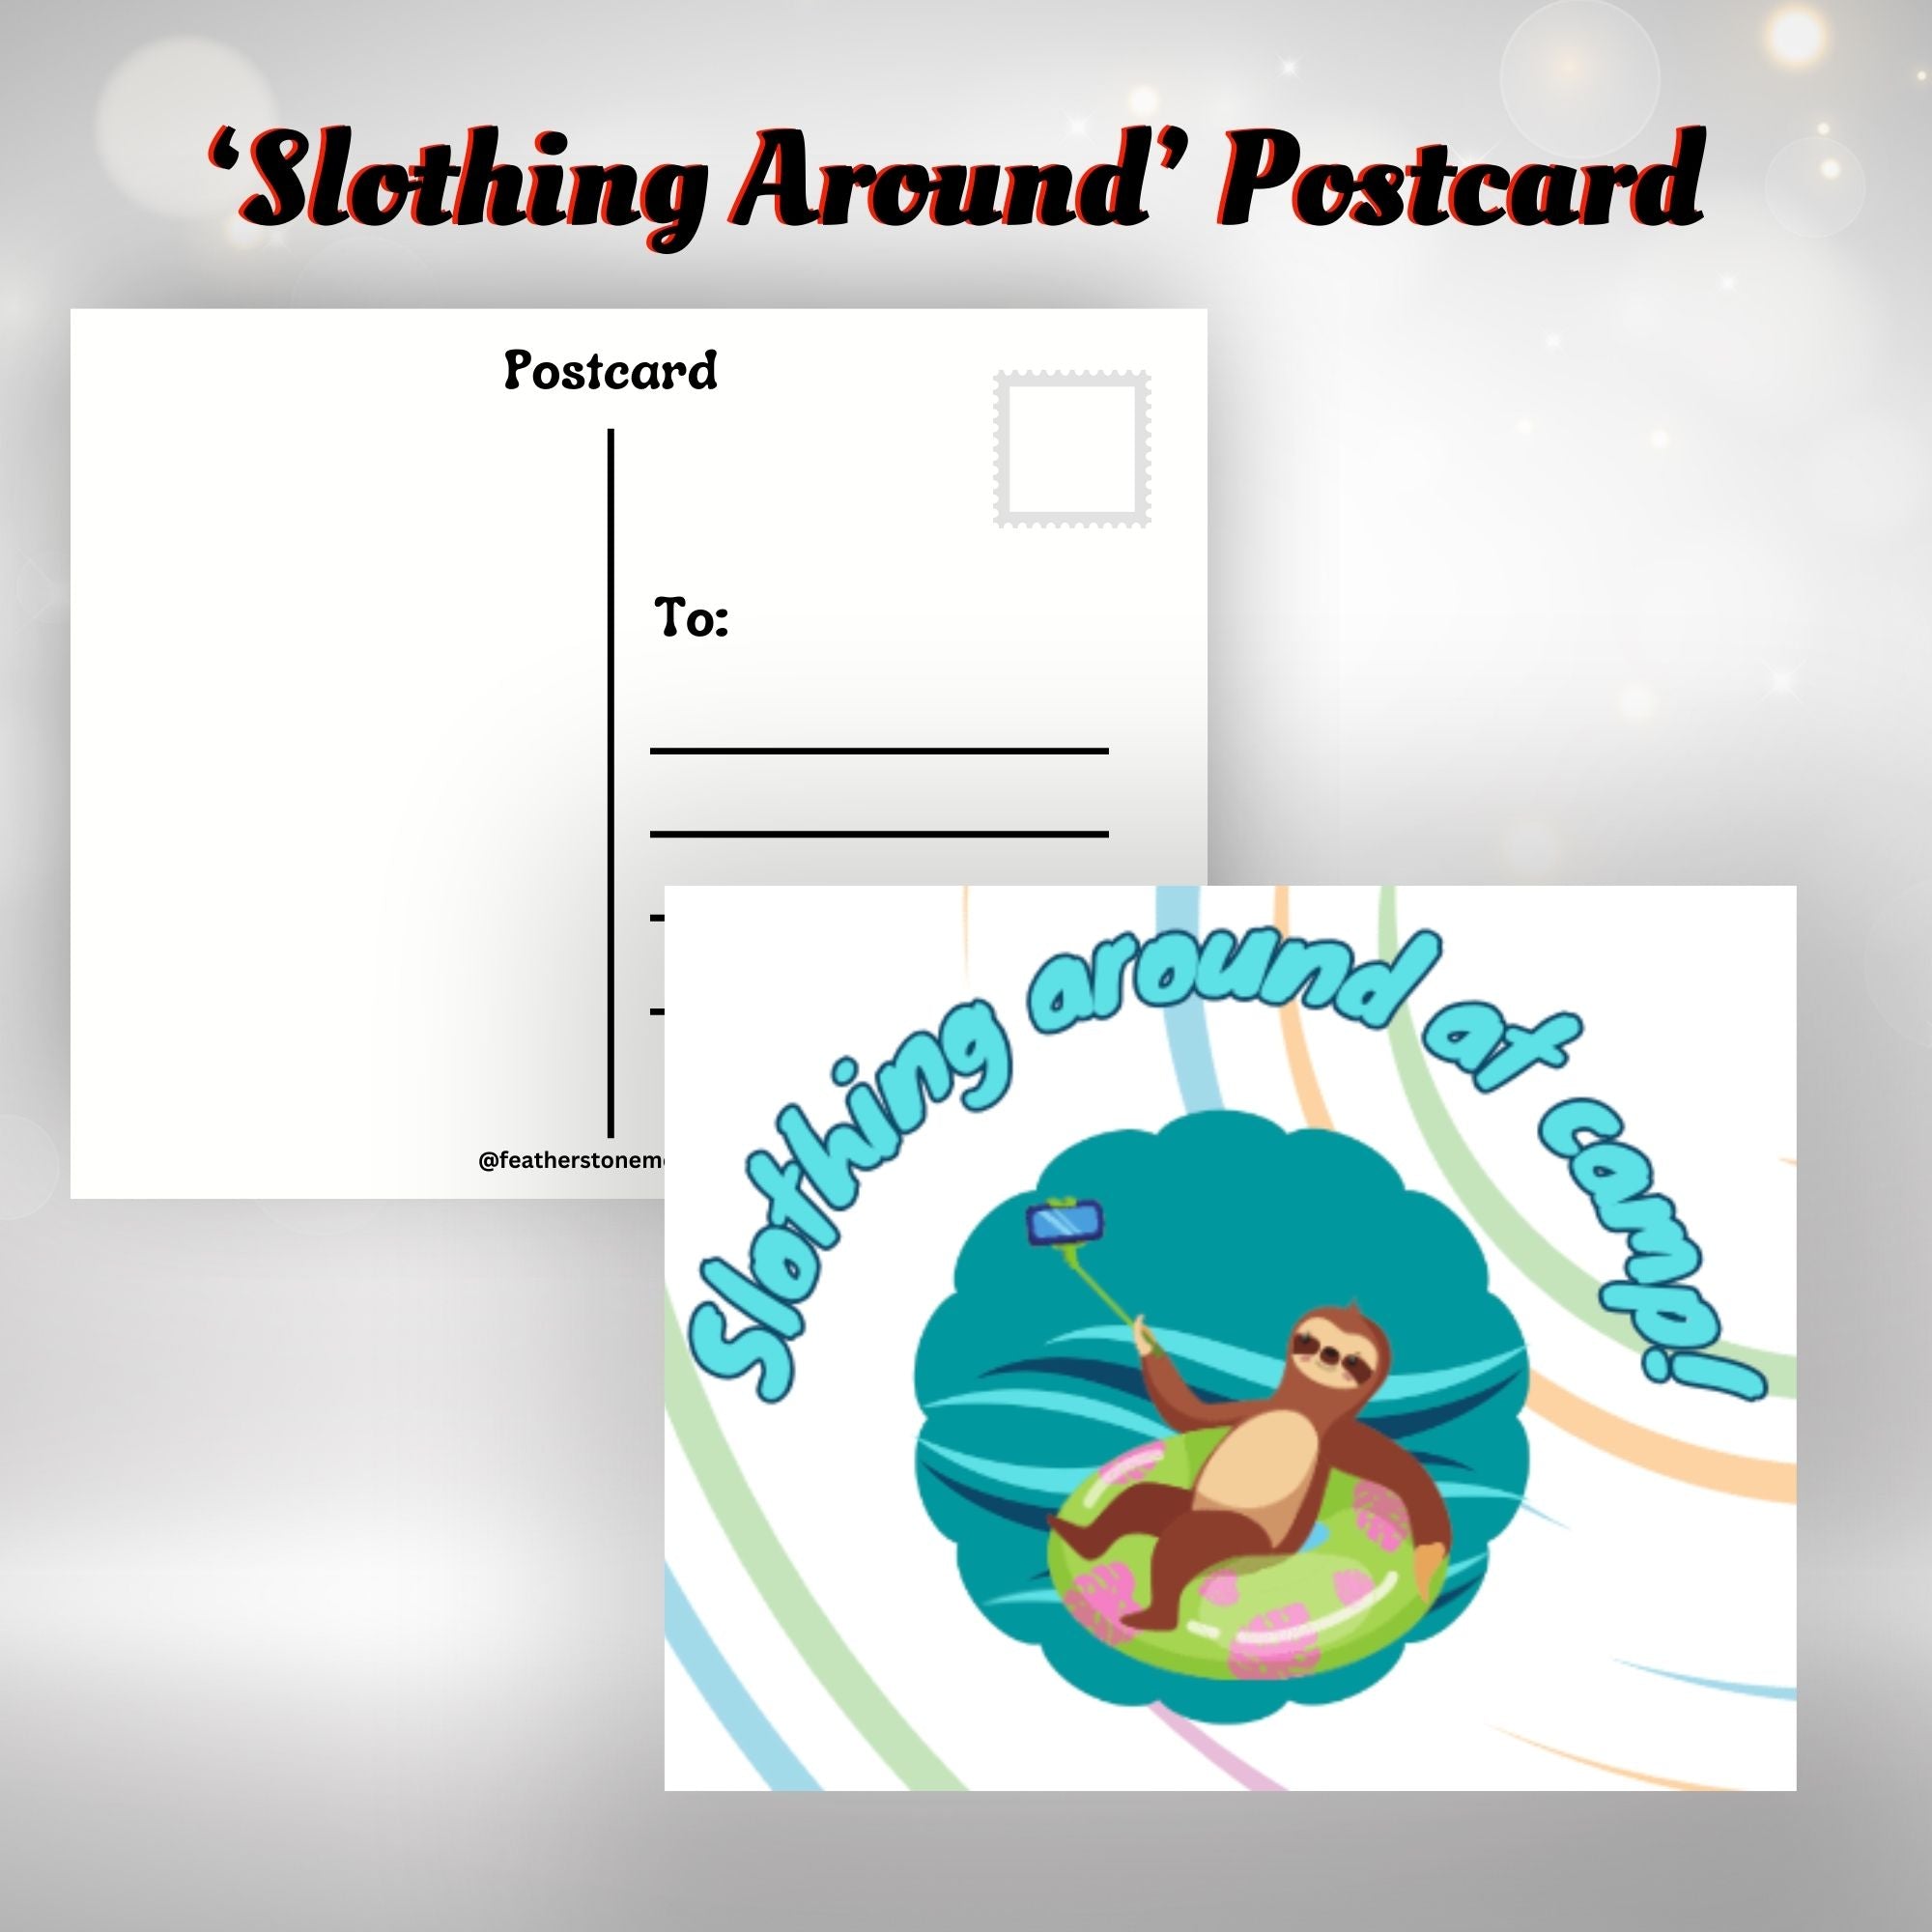 This image shows the Slothing Around at Camp! postcard with a sloth floating on an inner tube holding a selfie stick.